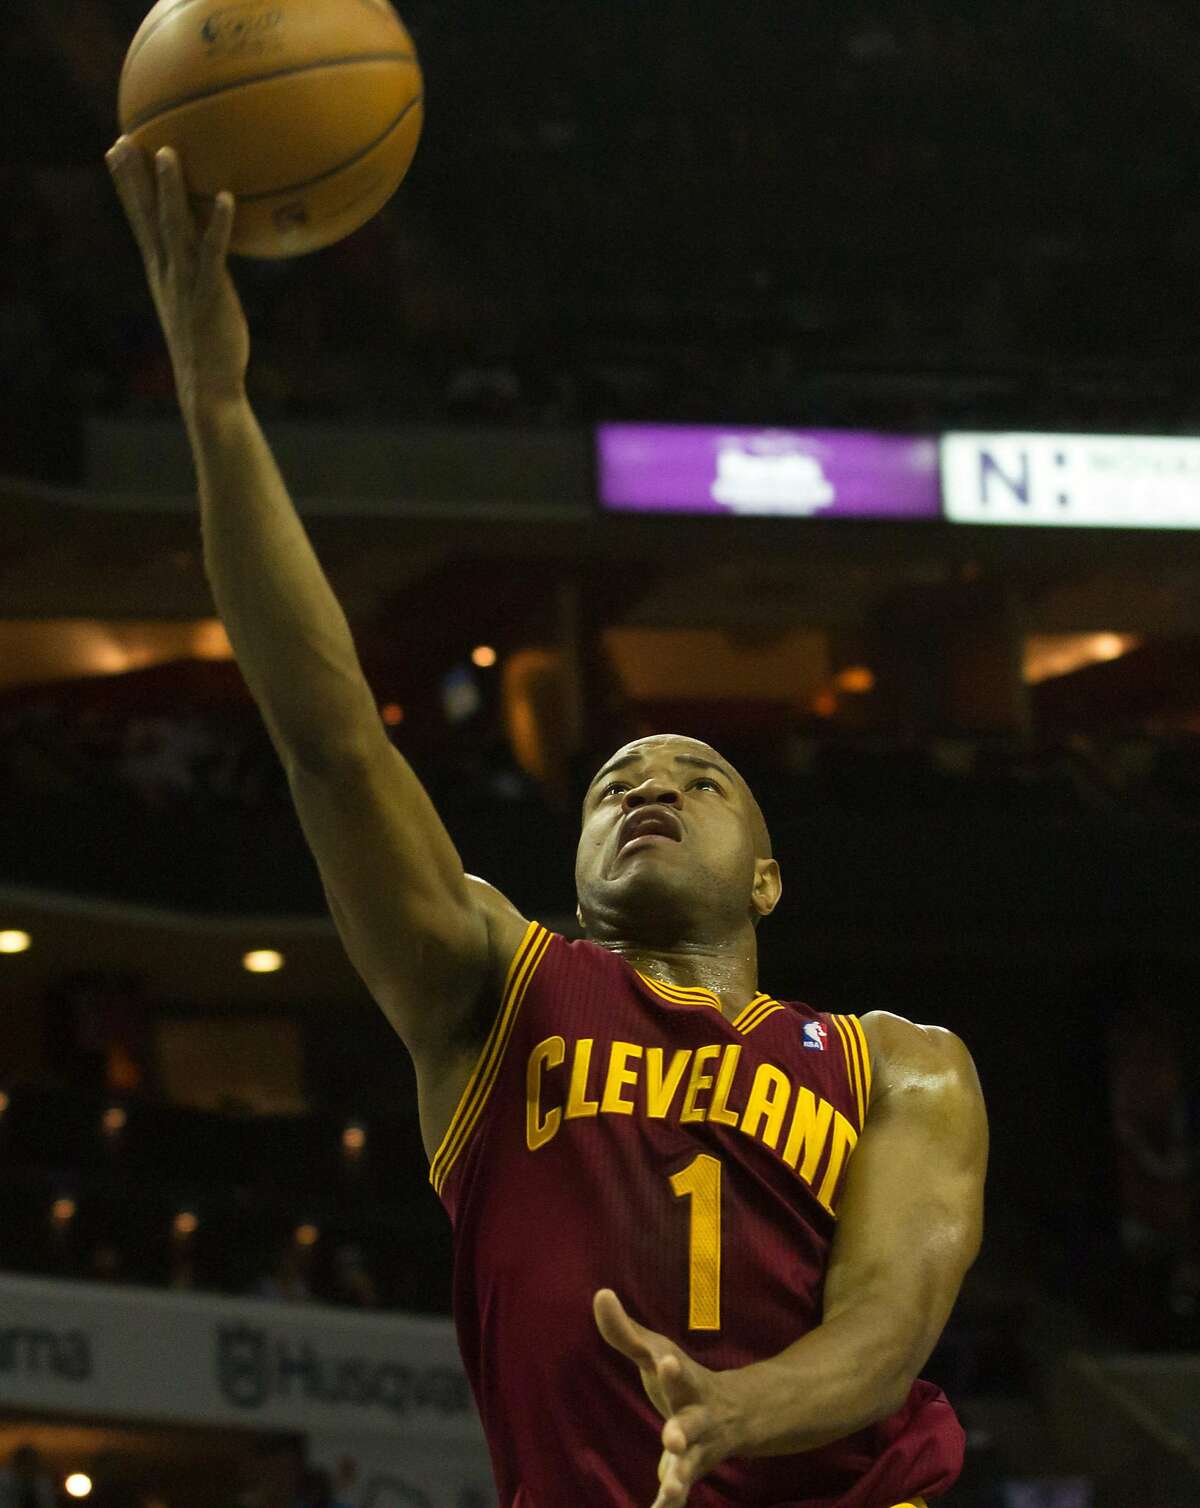 Mar 7, 2014; Charlotte, NC, USA; Cleveland Cavaliers point guard Jarrett Jack (1) goes up for a shot during the first half against the Charlotte Bobcats at Time Warner Cable Arena. Mandatory Credit: Jeremy Brevard-USA TODAY Sports